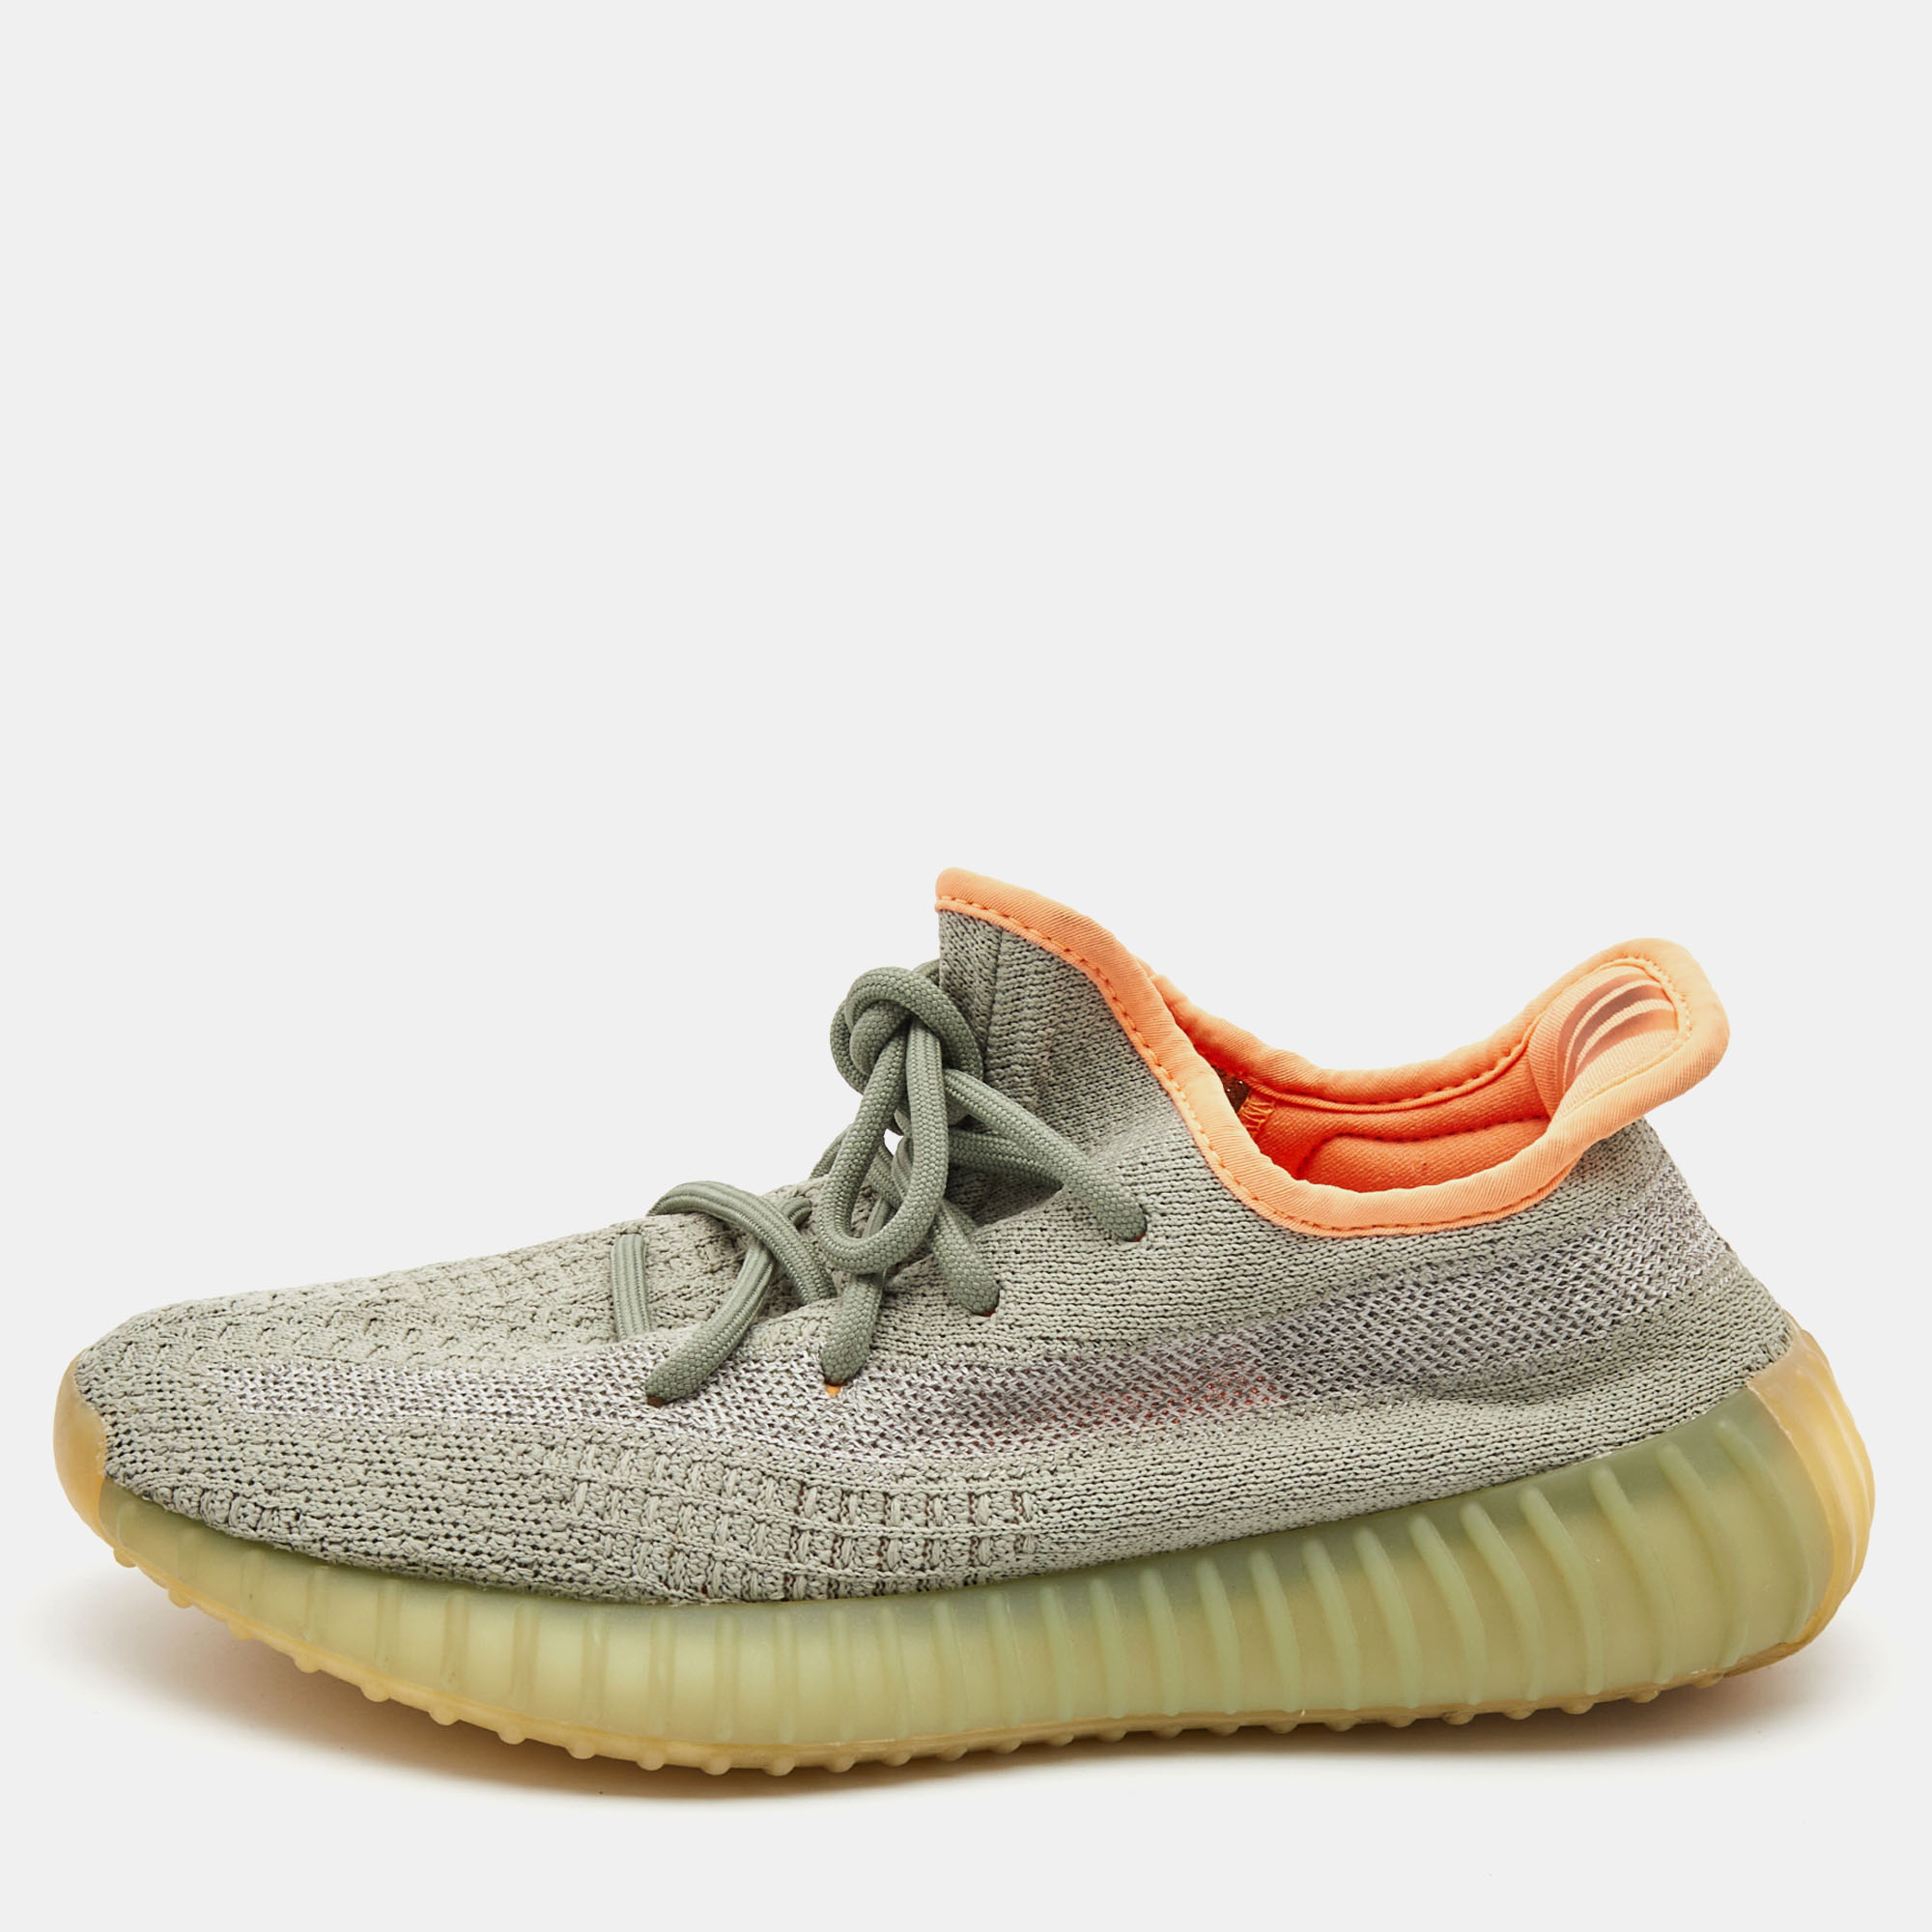 Pre-owned Yeezy X Adidas Green Fabric Boost 350 V2 Desert-sage Trainers Size 38